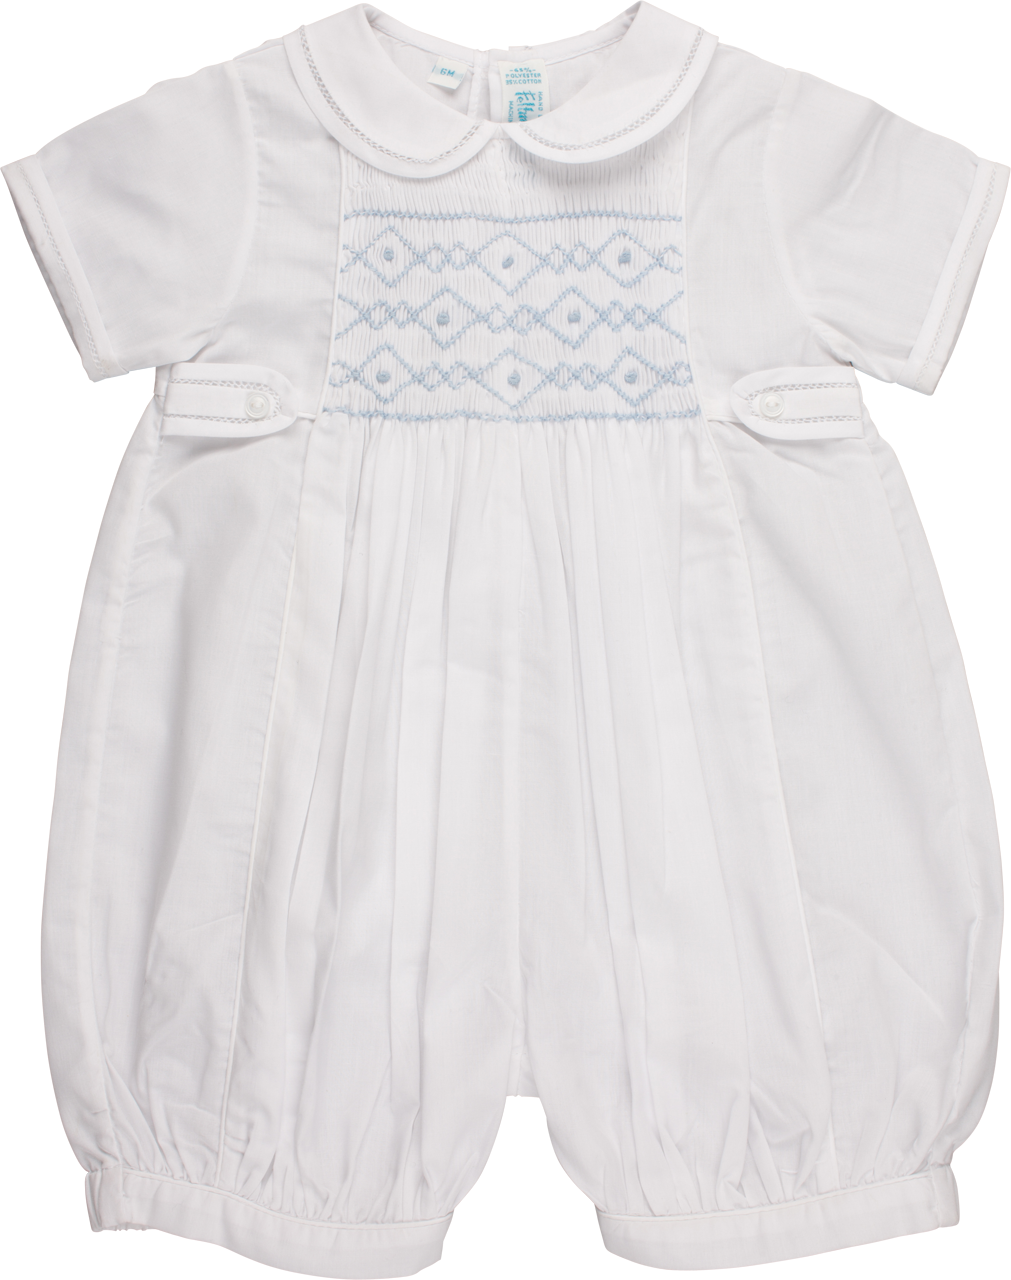 Boys Infant White & Blue  Bubble Style Romper with White Smocking